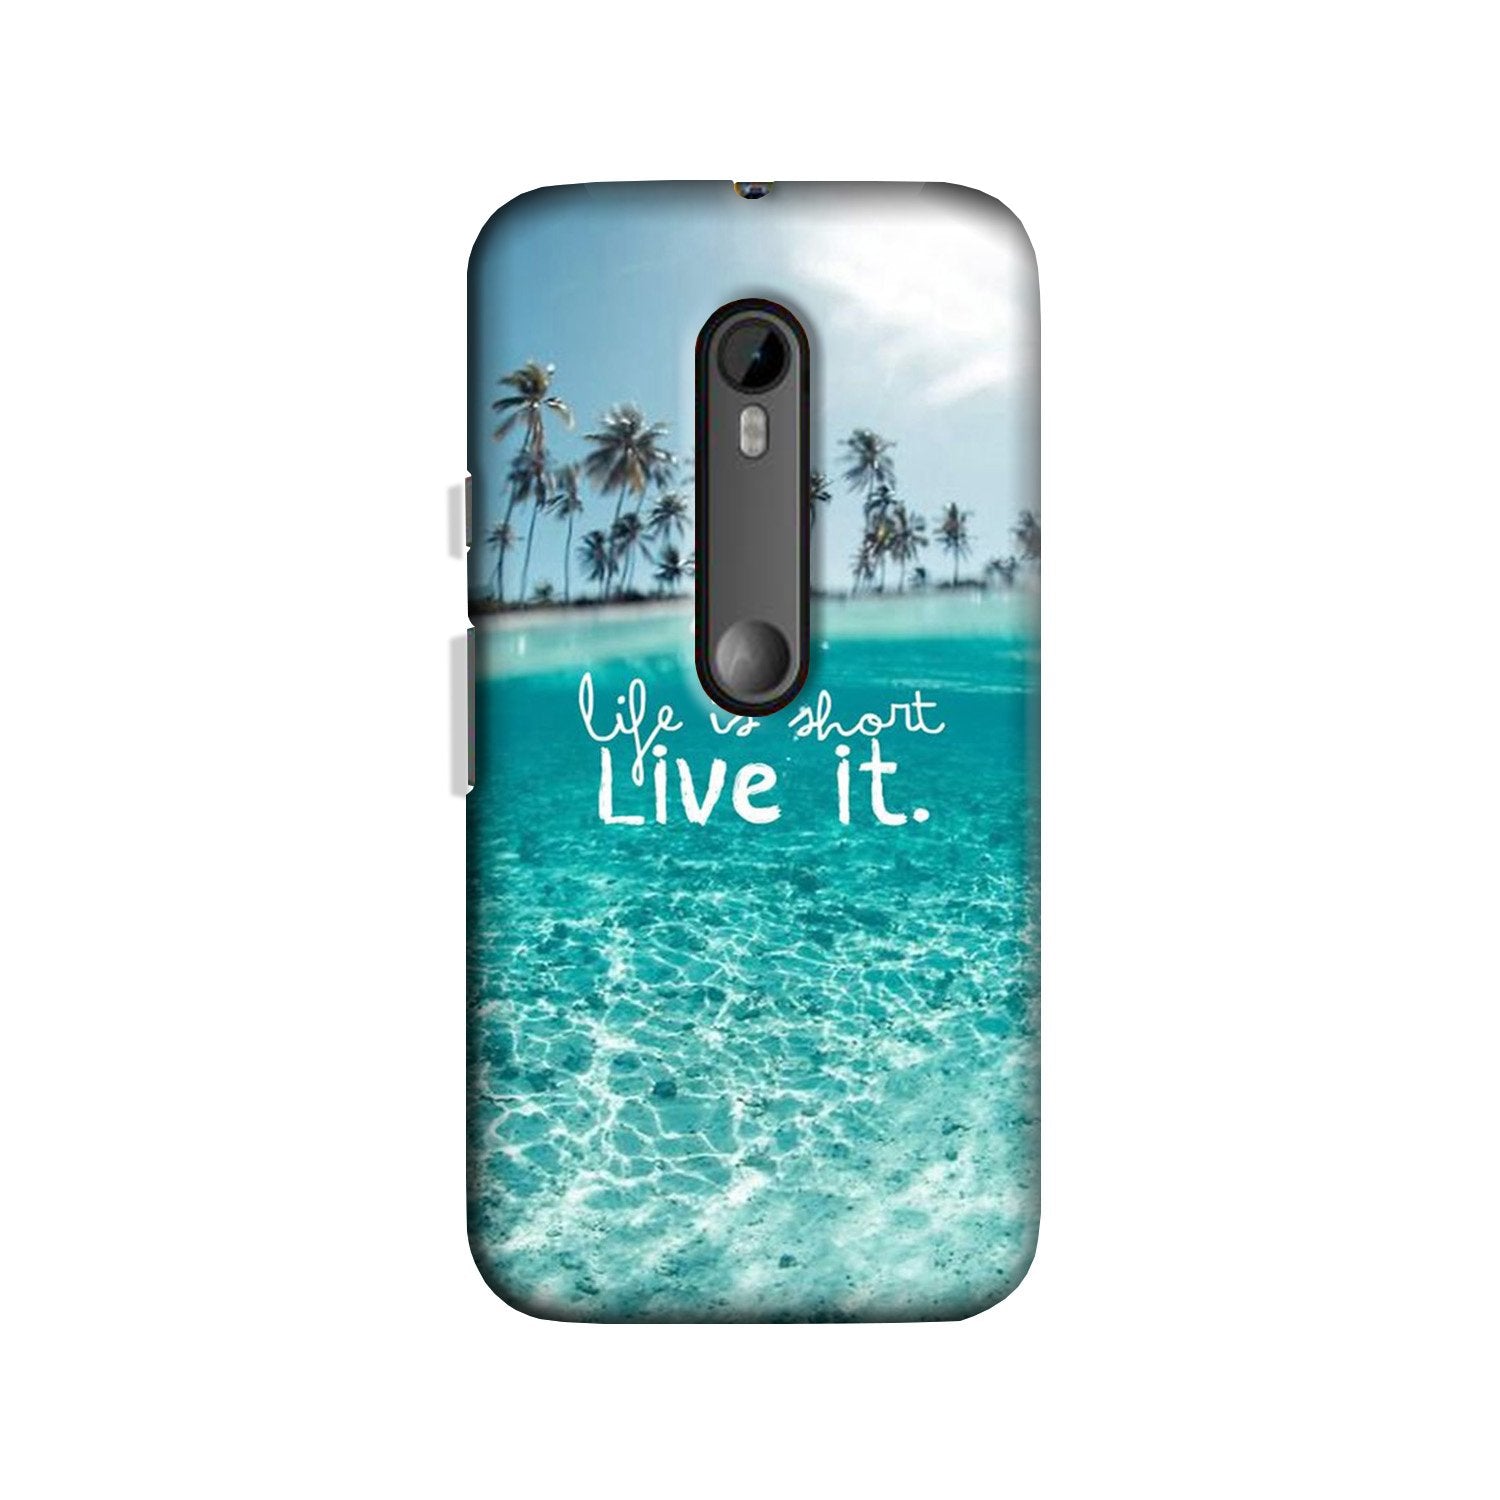 Life is short live it Case for Moto X Force